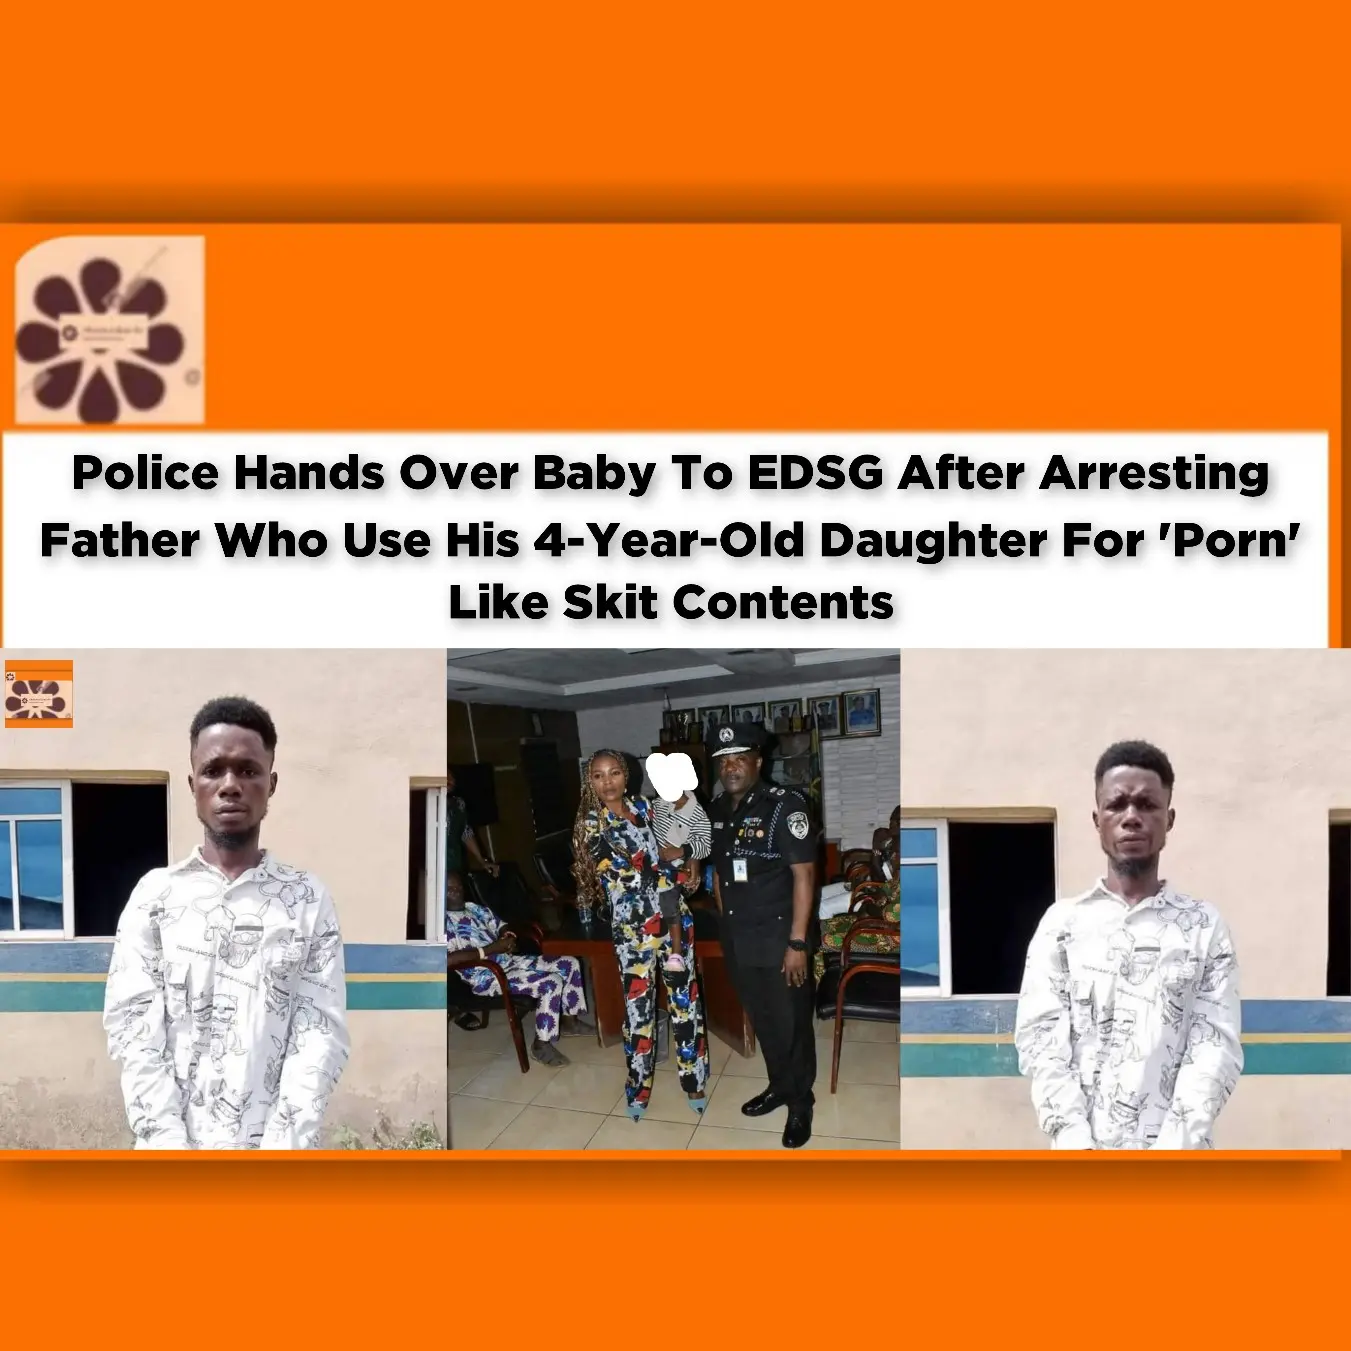 Police Hands Over Baby To EDSG After Arresting Father Who Use His 4-Year-Old Daughter For 'Porn' Like Skit Contents ~ OsazuwaAkonedo #herdsmen